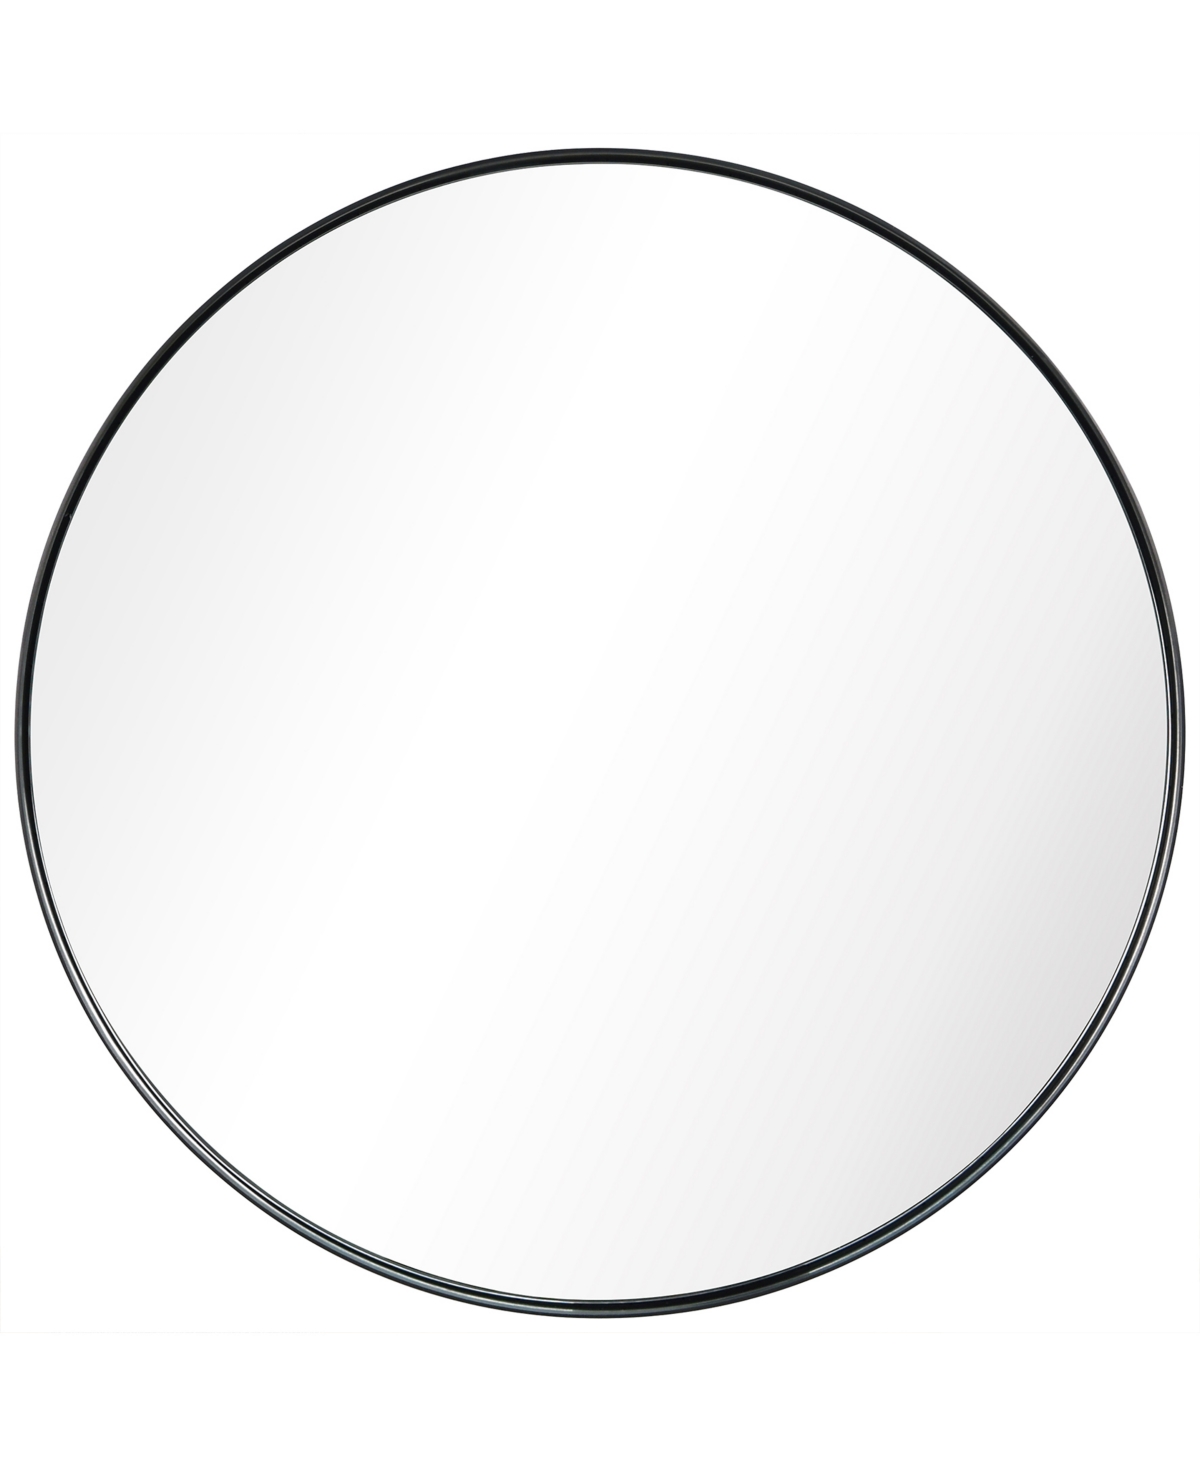 Ultra Brushed Stainless Steel Round Wall Mirror, 30" x 30" - Black